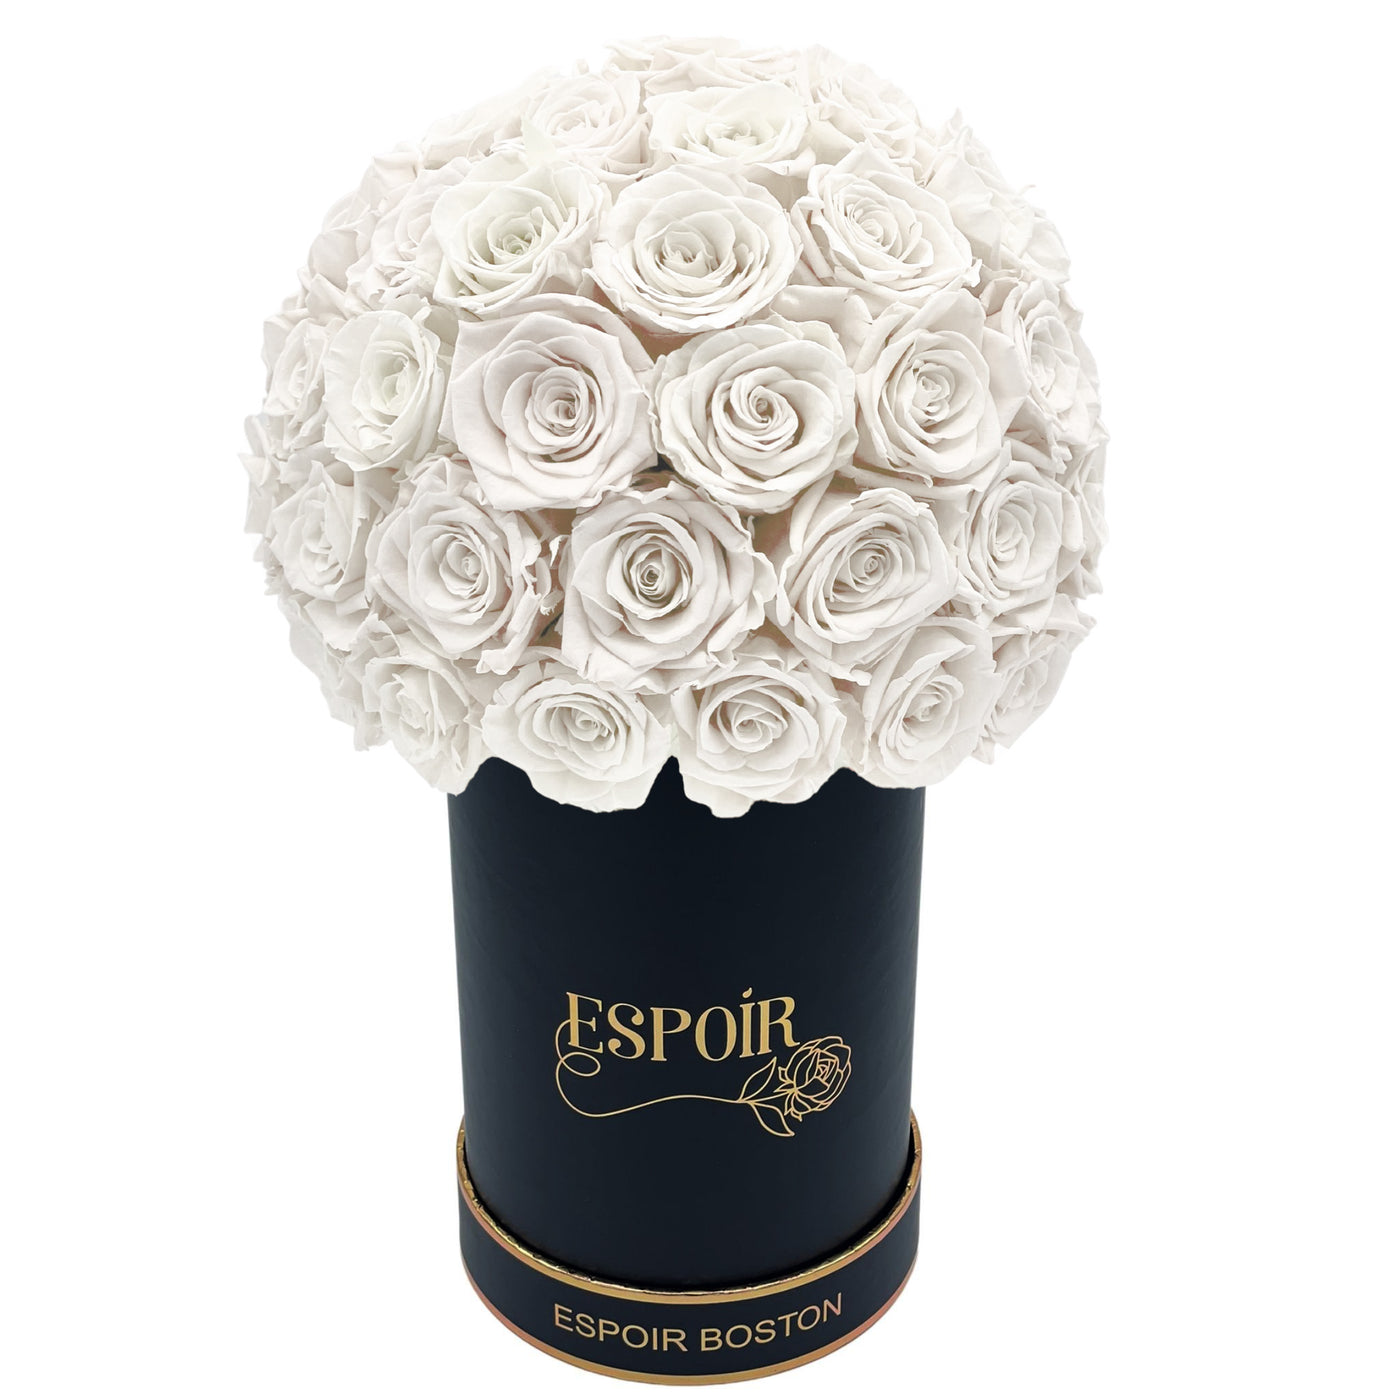 The Classic Centerpiece (Black and Gold)